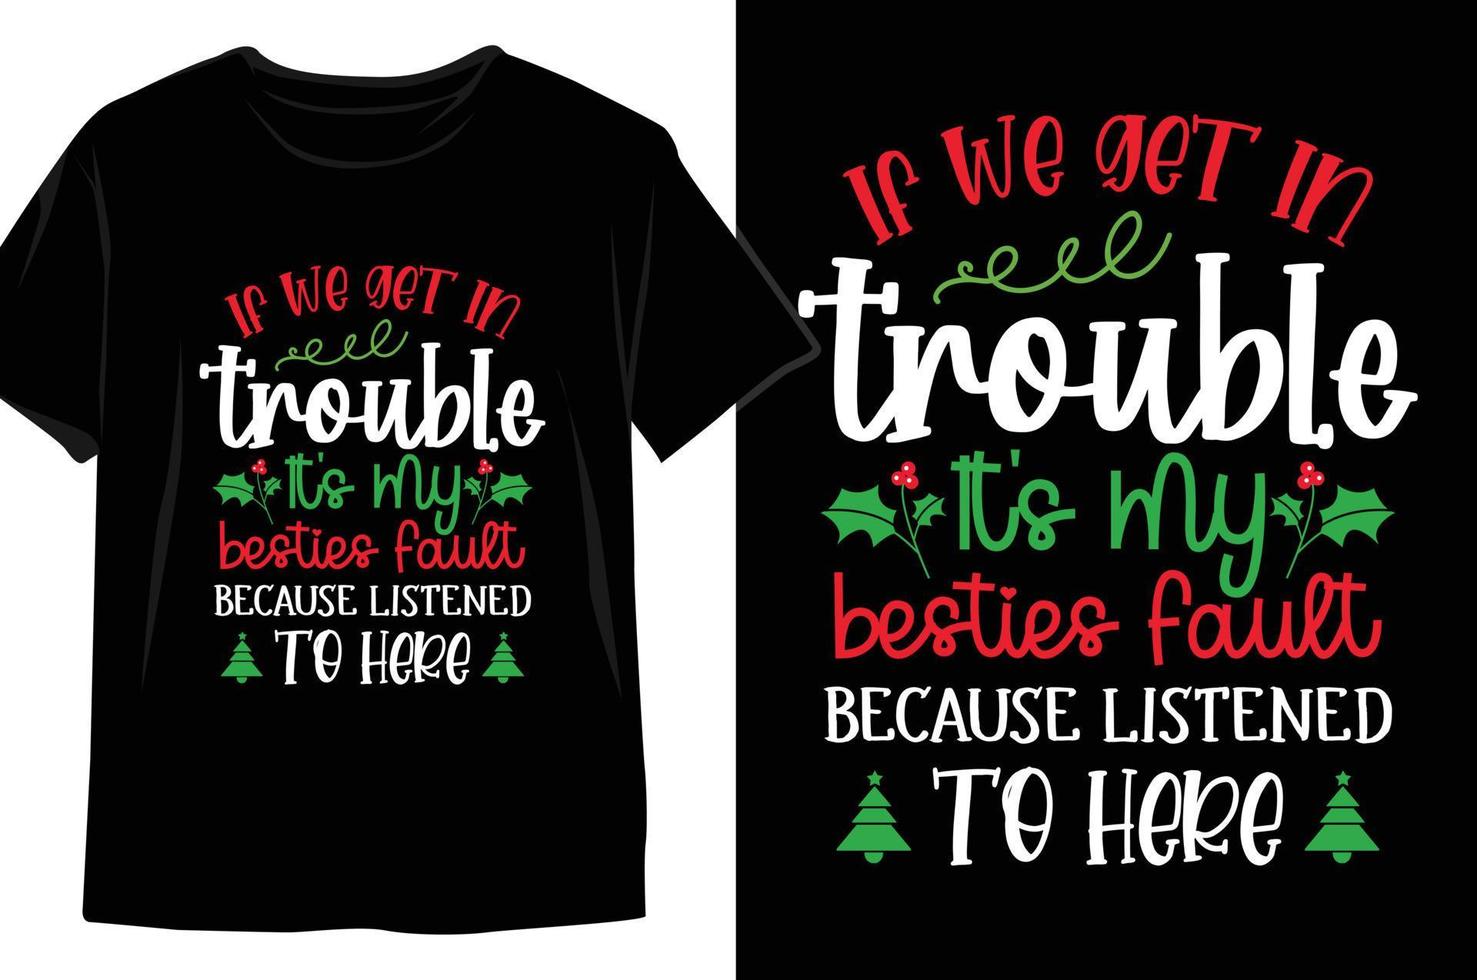 If We Get In Trouble It's My Besties Fault Because Listened To Here Christmas t shirt Design vector